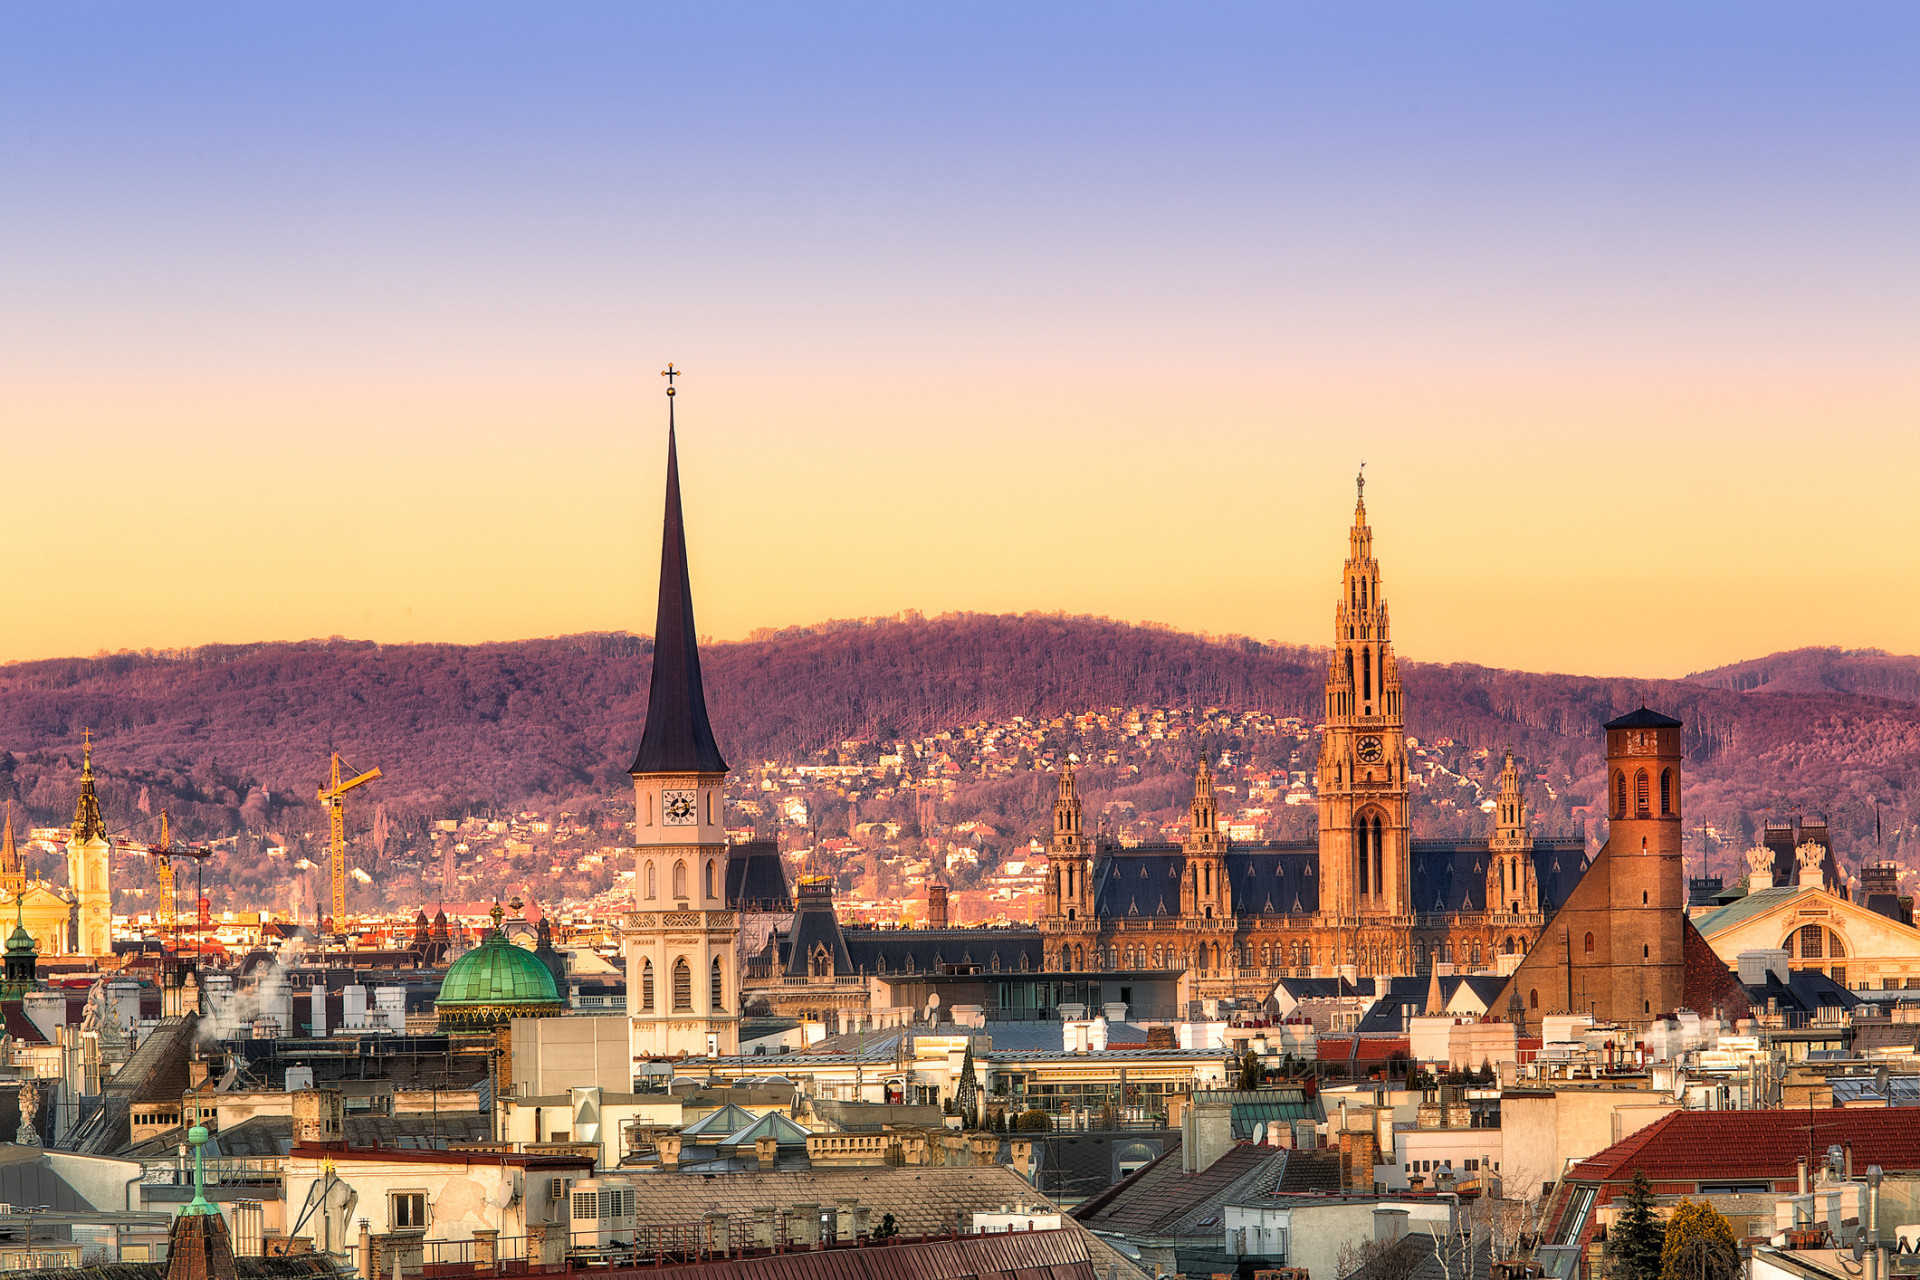 Known as the "City of Music", Vienna is a city where you can feel the arts all around you.